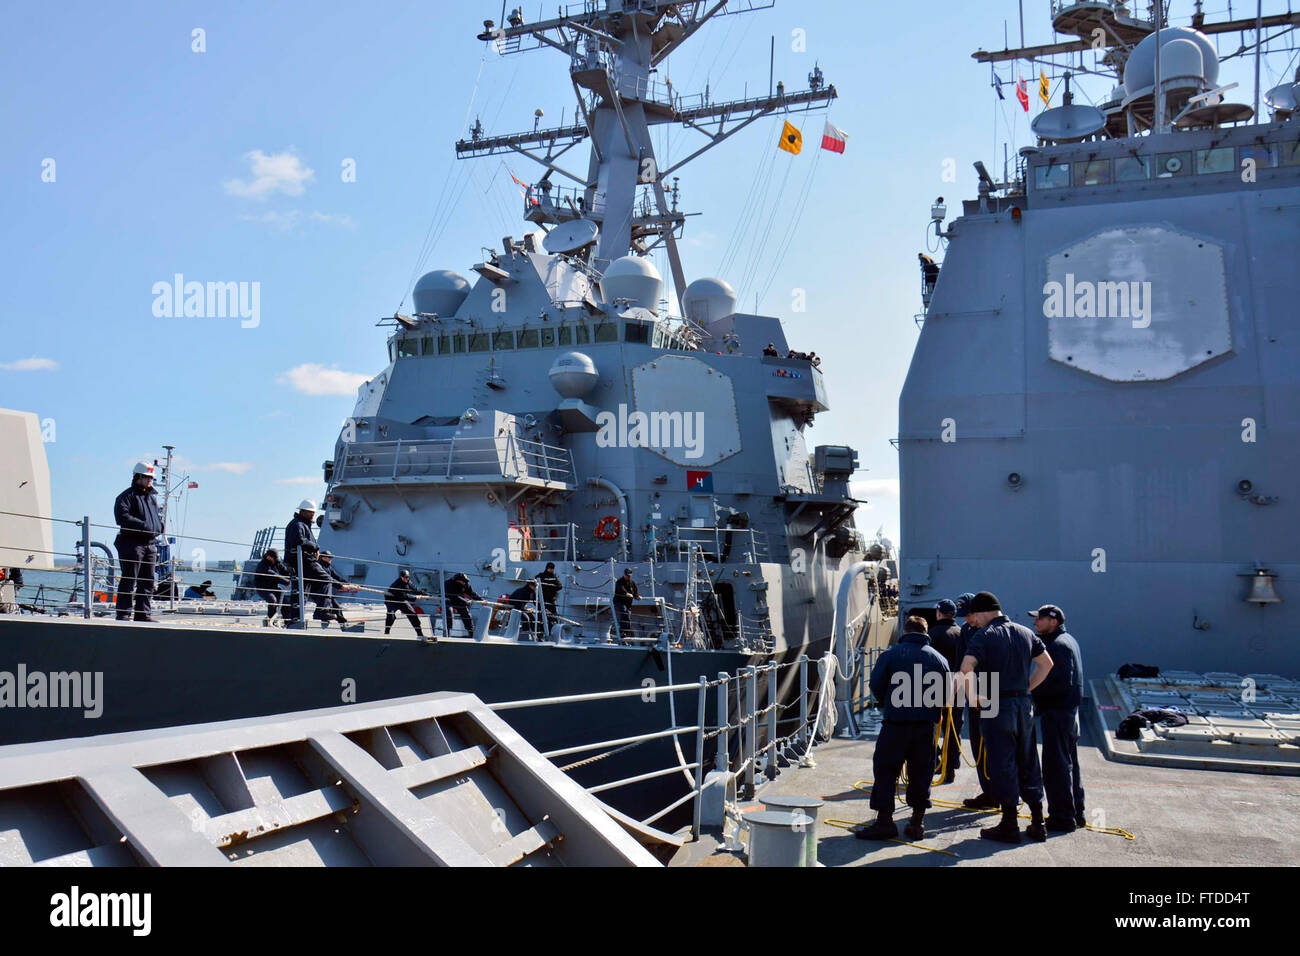 150604-N-IY633-034 GDYNIA, Poland (June 4, 2015) – USS Jason Dunham (DDG 109), left, moors alongside Standing NATO Maritime Group 2 (SNMG2) flagship USS Vicksburg (CG 69) in Gdynia for a port visit in preparation for exercise Baltic Operations (BALTOPS) 2015. BALTOPS is an annually reoccurring multinational exercise designed to enhance flexibility and interoperability, as well as demonstrate resolve of Allied and partner forces to defend the Baltic region. (U.S. Navy photo by Mass Communication Specialist 2nd Class Amanda S. Kitchner/Released) Stock Photo